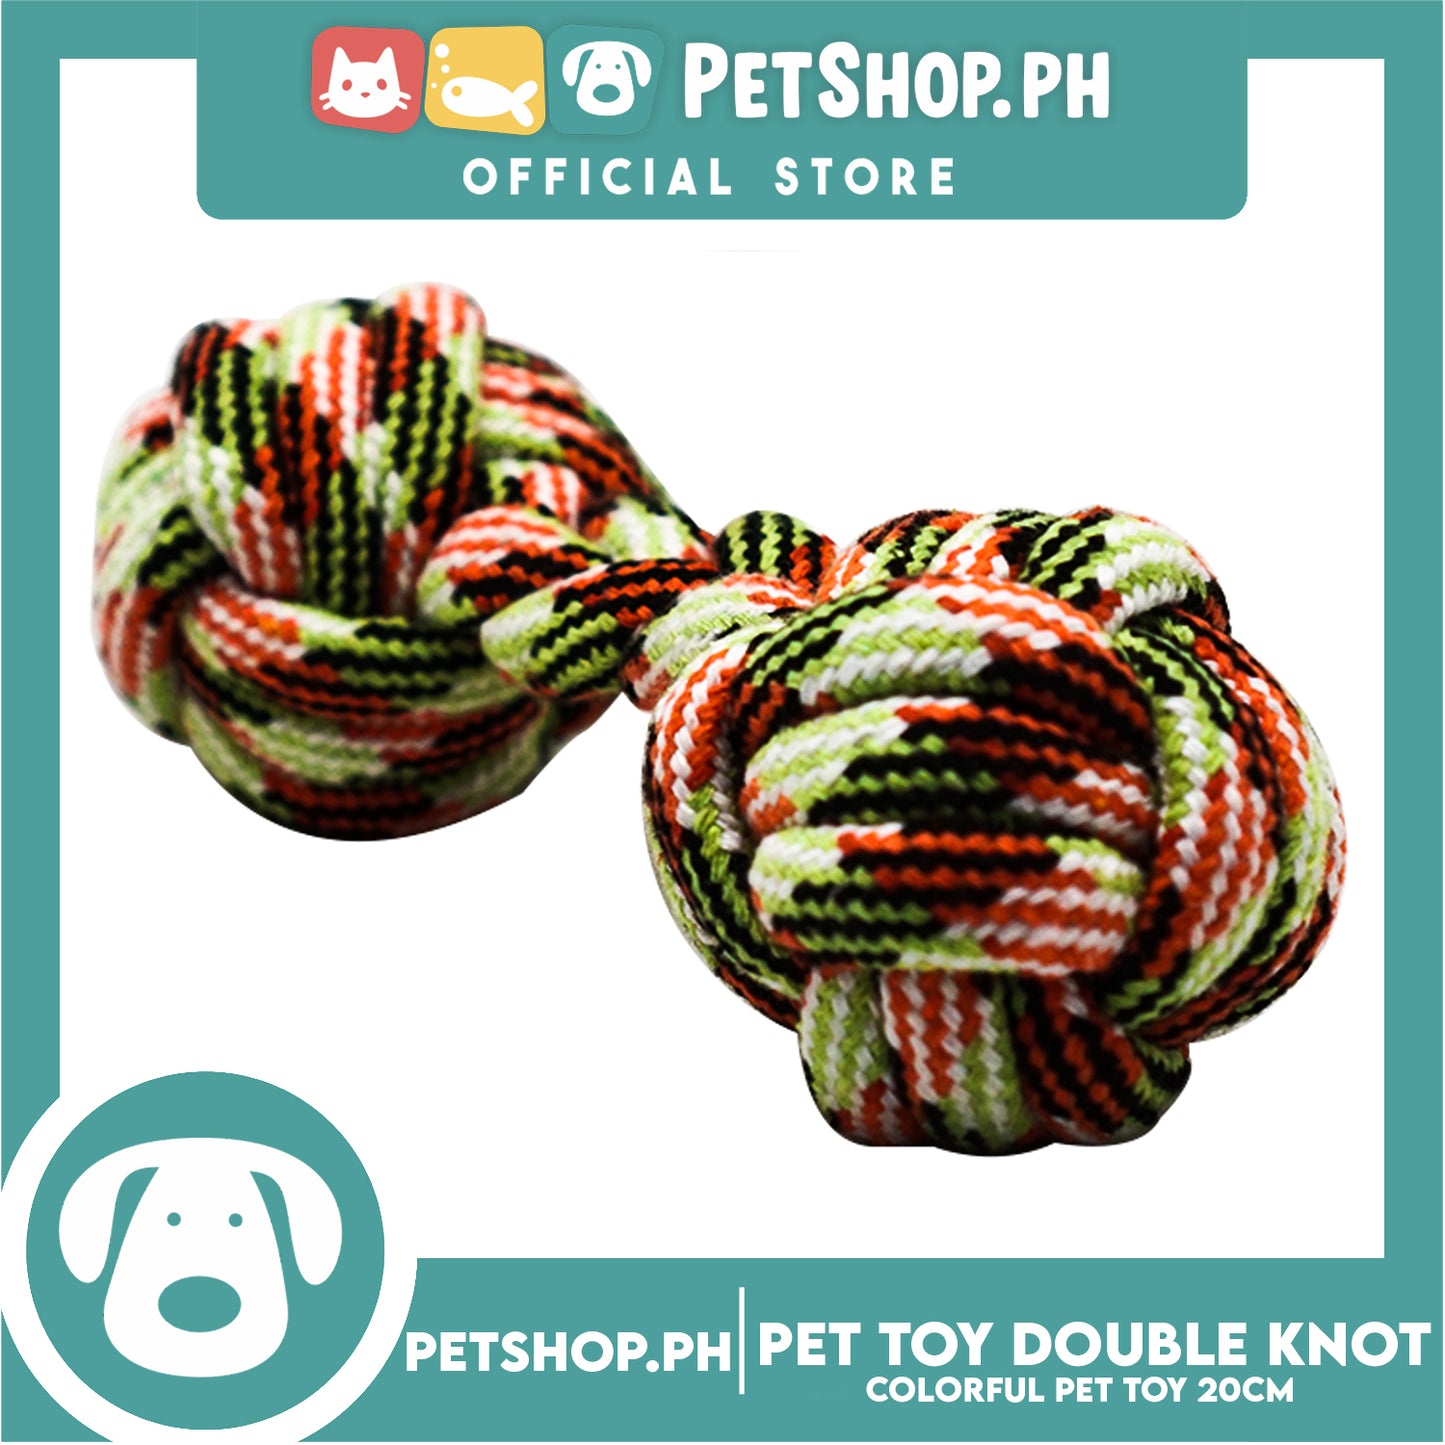 Pet Toy Colorful Double Knot Rope Ball Toys 20cm for Small Medium Dogs Puppies